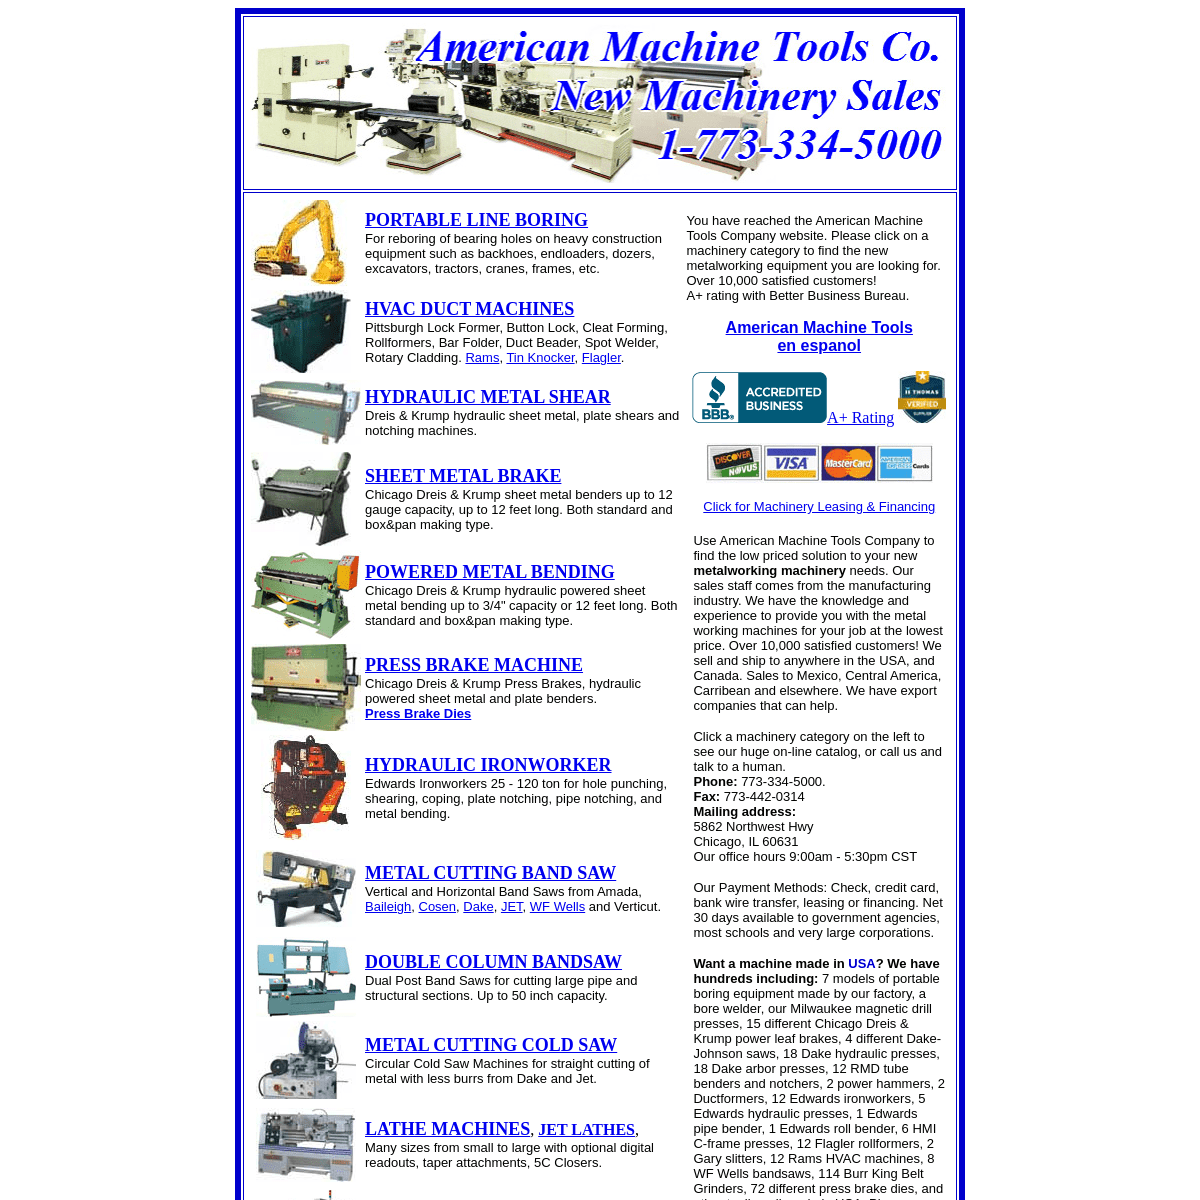 A complete backup of https://americanmachinetools.com